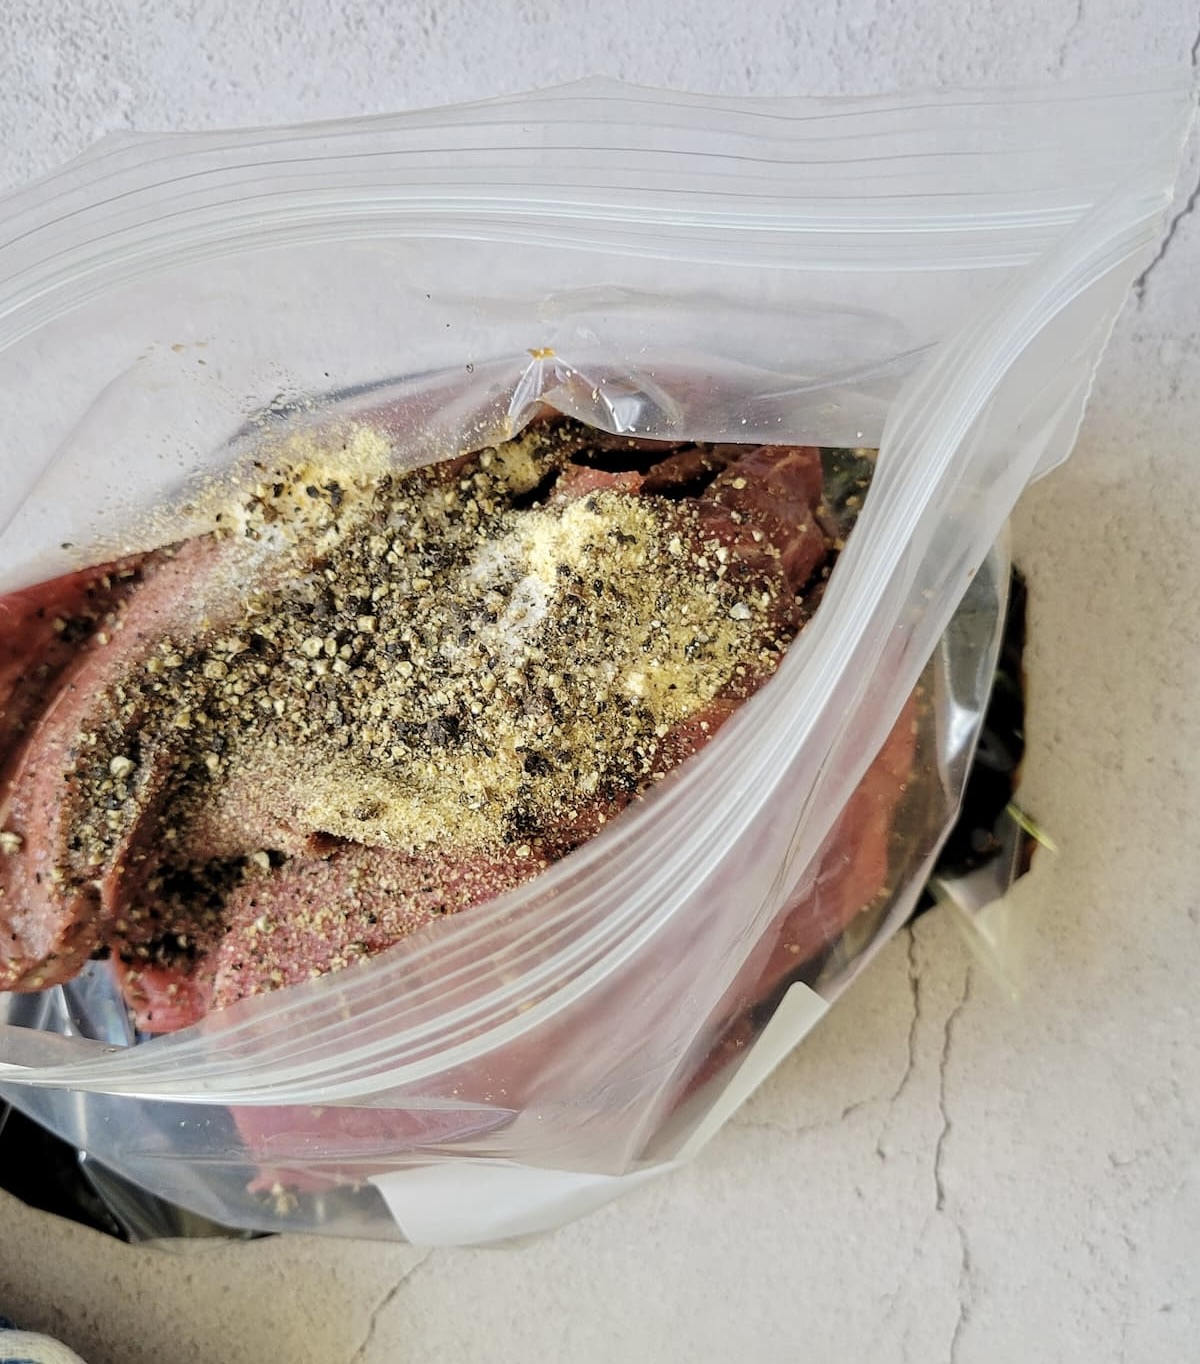 fresh cracked pepper and other spices and soy sauce with sliced raw meat in an opened ziploc bag